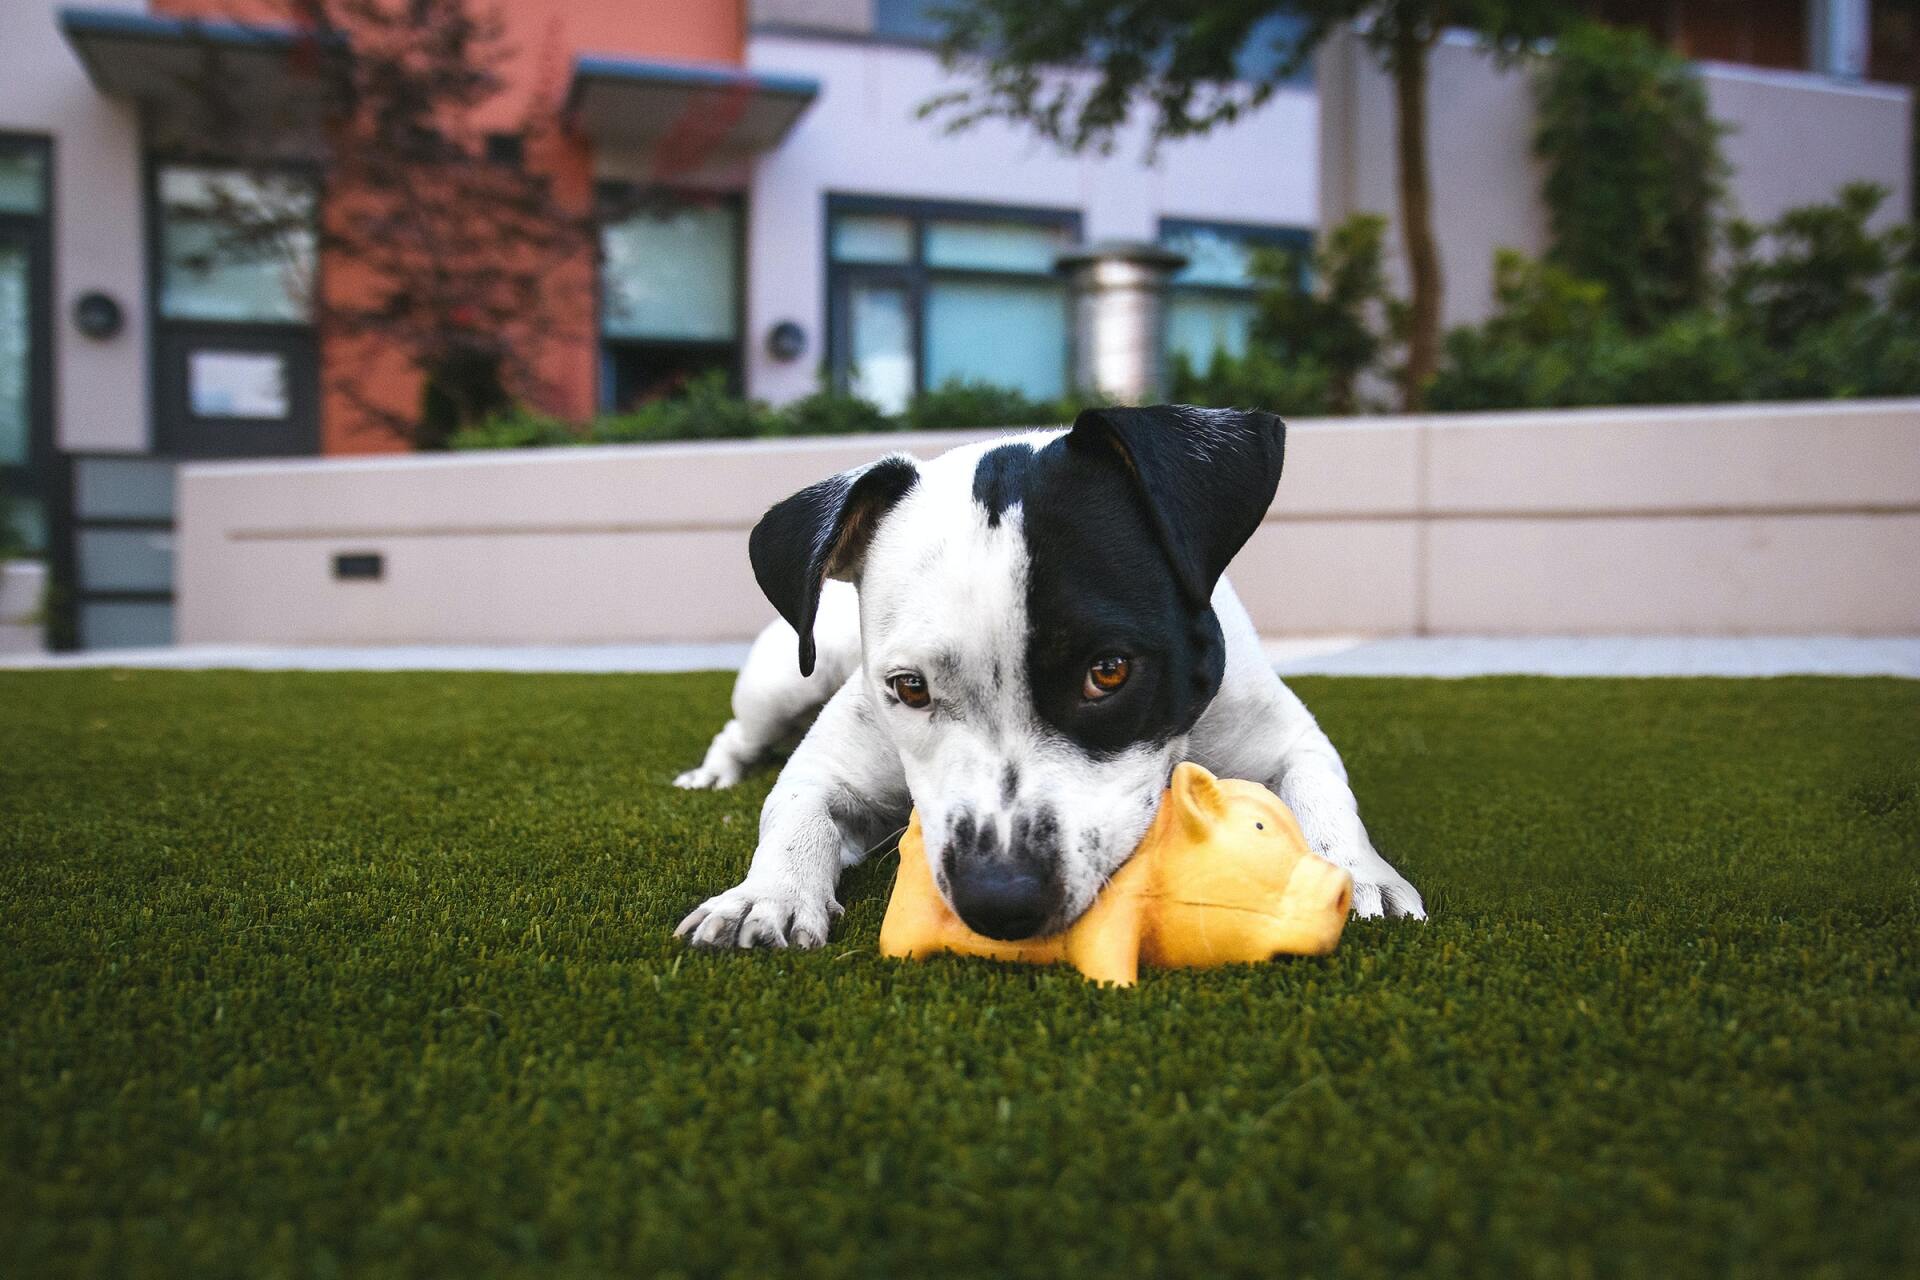 this dog is clearly enjoying playing around this pet-friendly turf